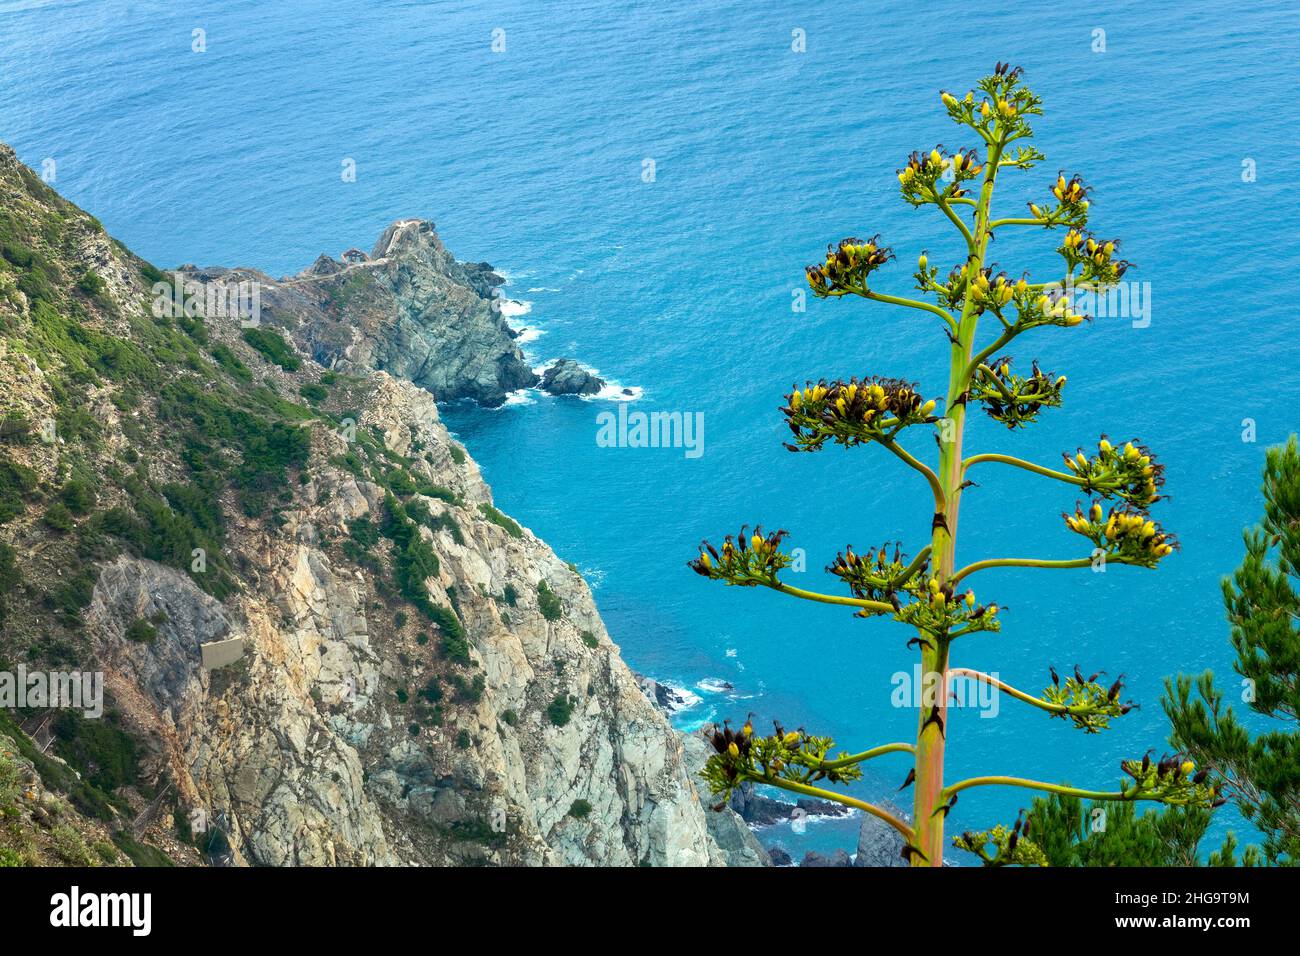 Agave flower, mediterranean coast with rocks and blue water in the background Stock Photo